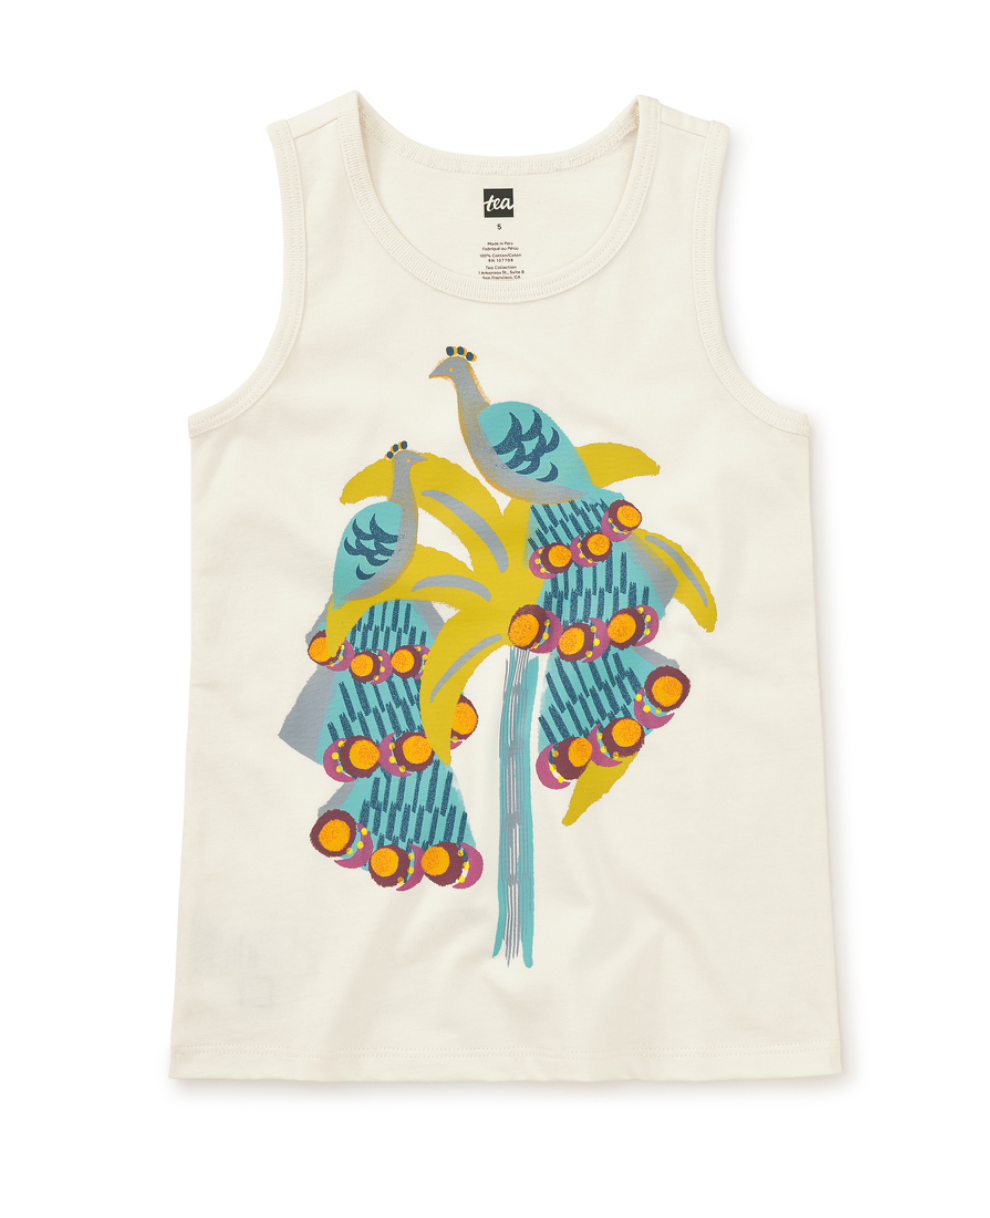 Perched Peacocks Tank Top